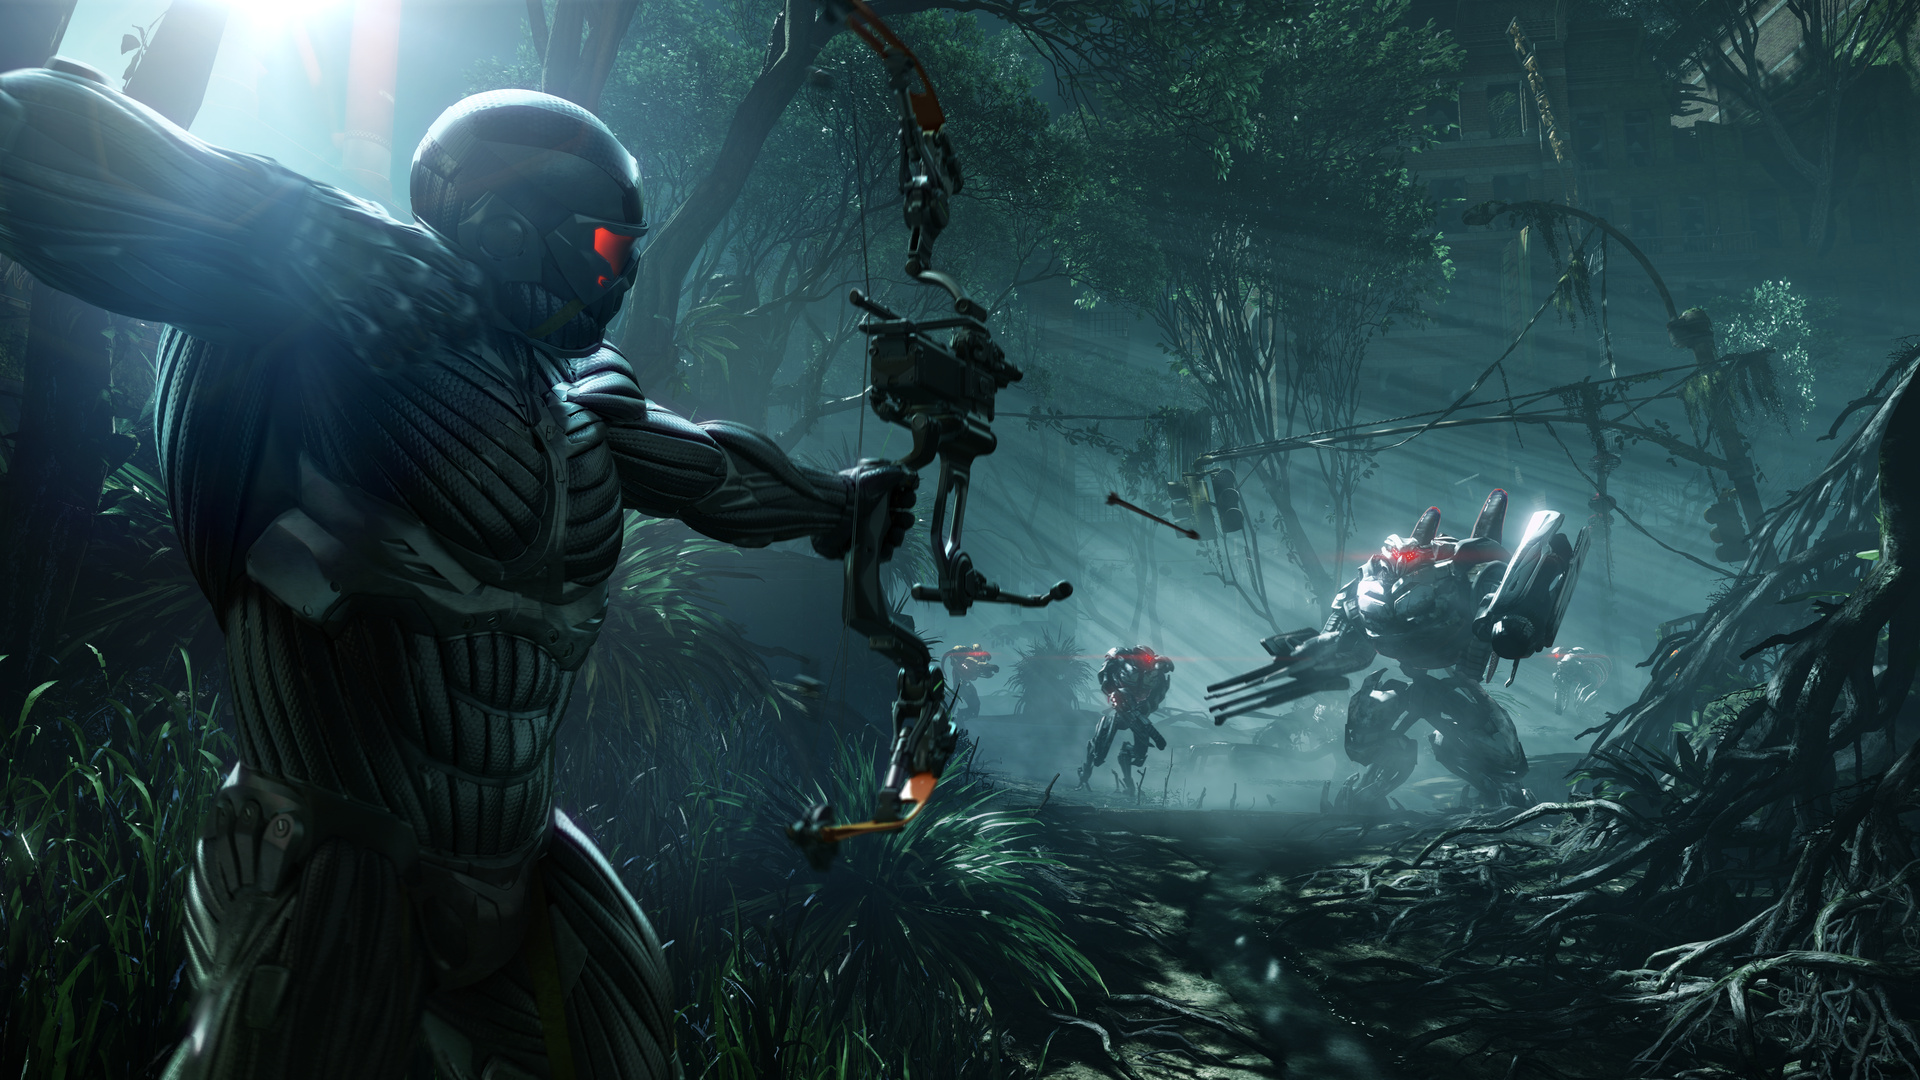 Crysis 3, New York setting, Intriguing story details, Action-packed gameplay, 1920x1080 Full HD Desktop